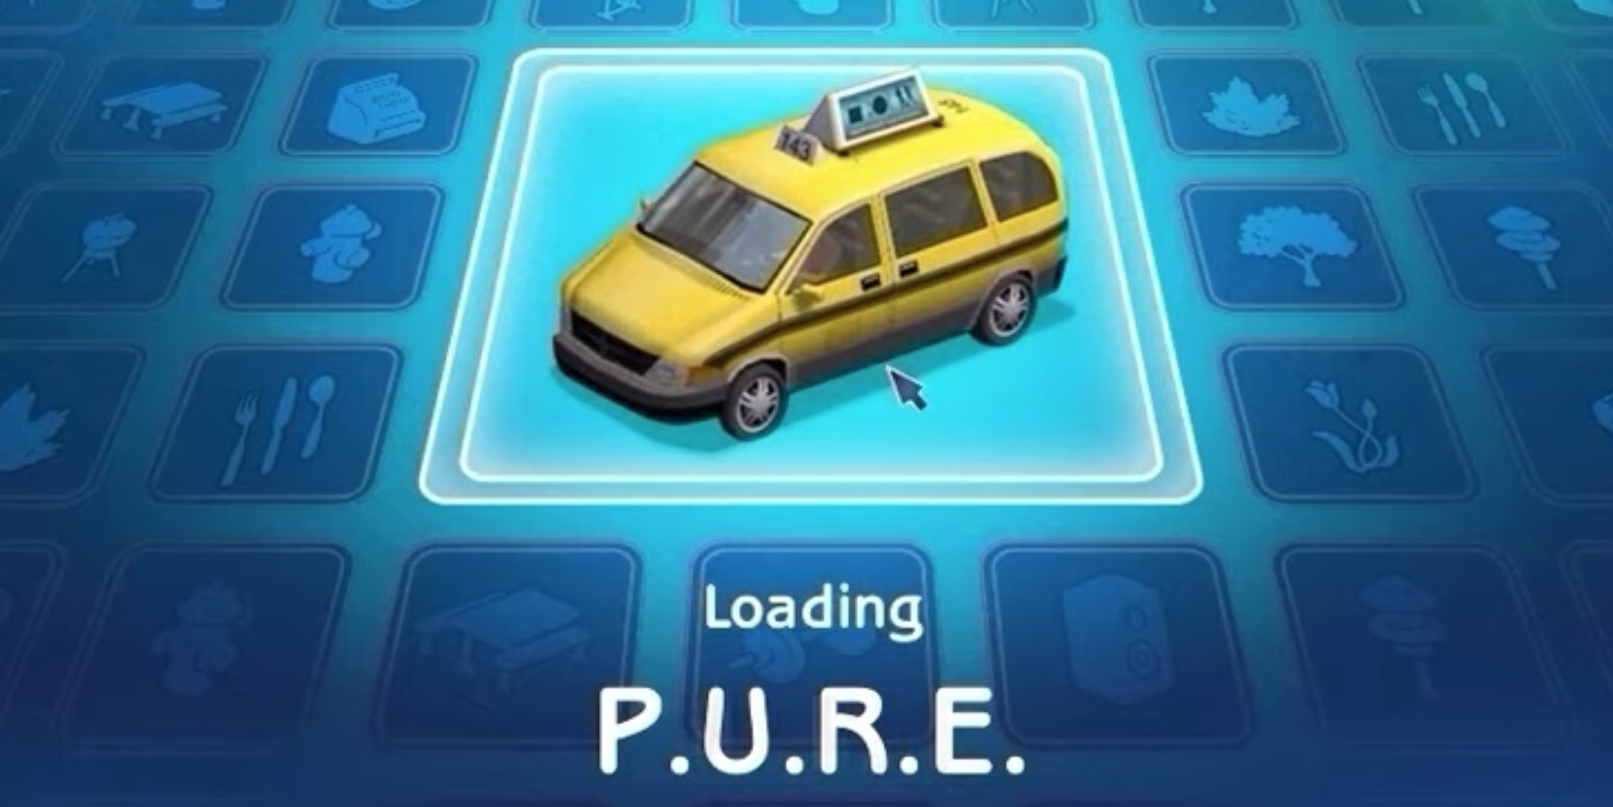 A taxi going to PURE in The Sims 2 (loading screen)